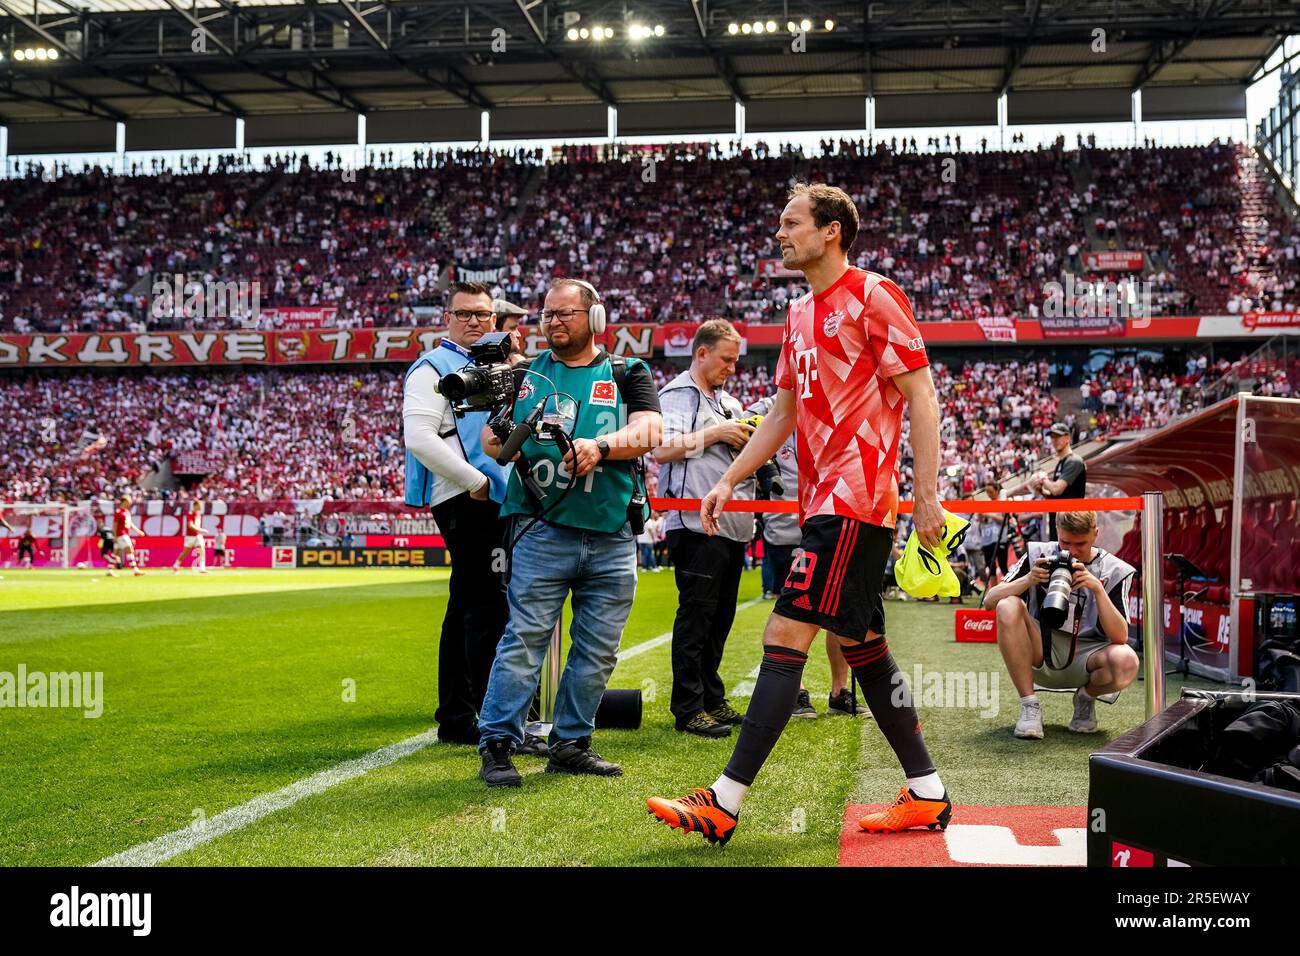 COLOGNE, GERMANY - MAY 27: Daley Blind of FC Bayern Munchen walks out for warm up prior to the Bundesliga match between 1. FC Koln and FC Bayern Munchen at the RheinEnergieStadion on May 27, 2023 in Cologne, Germany (Photo by Rene Nijhuis/Orange Pictures) Stock Photo